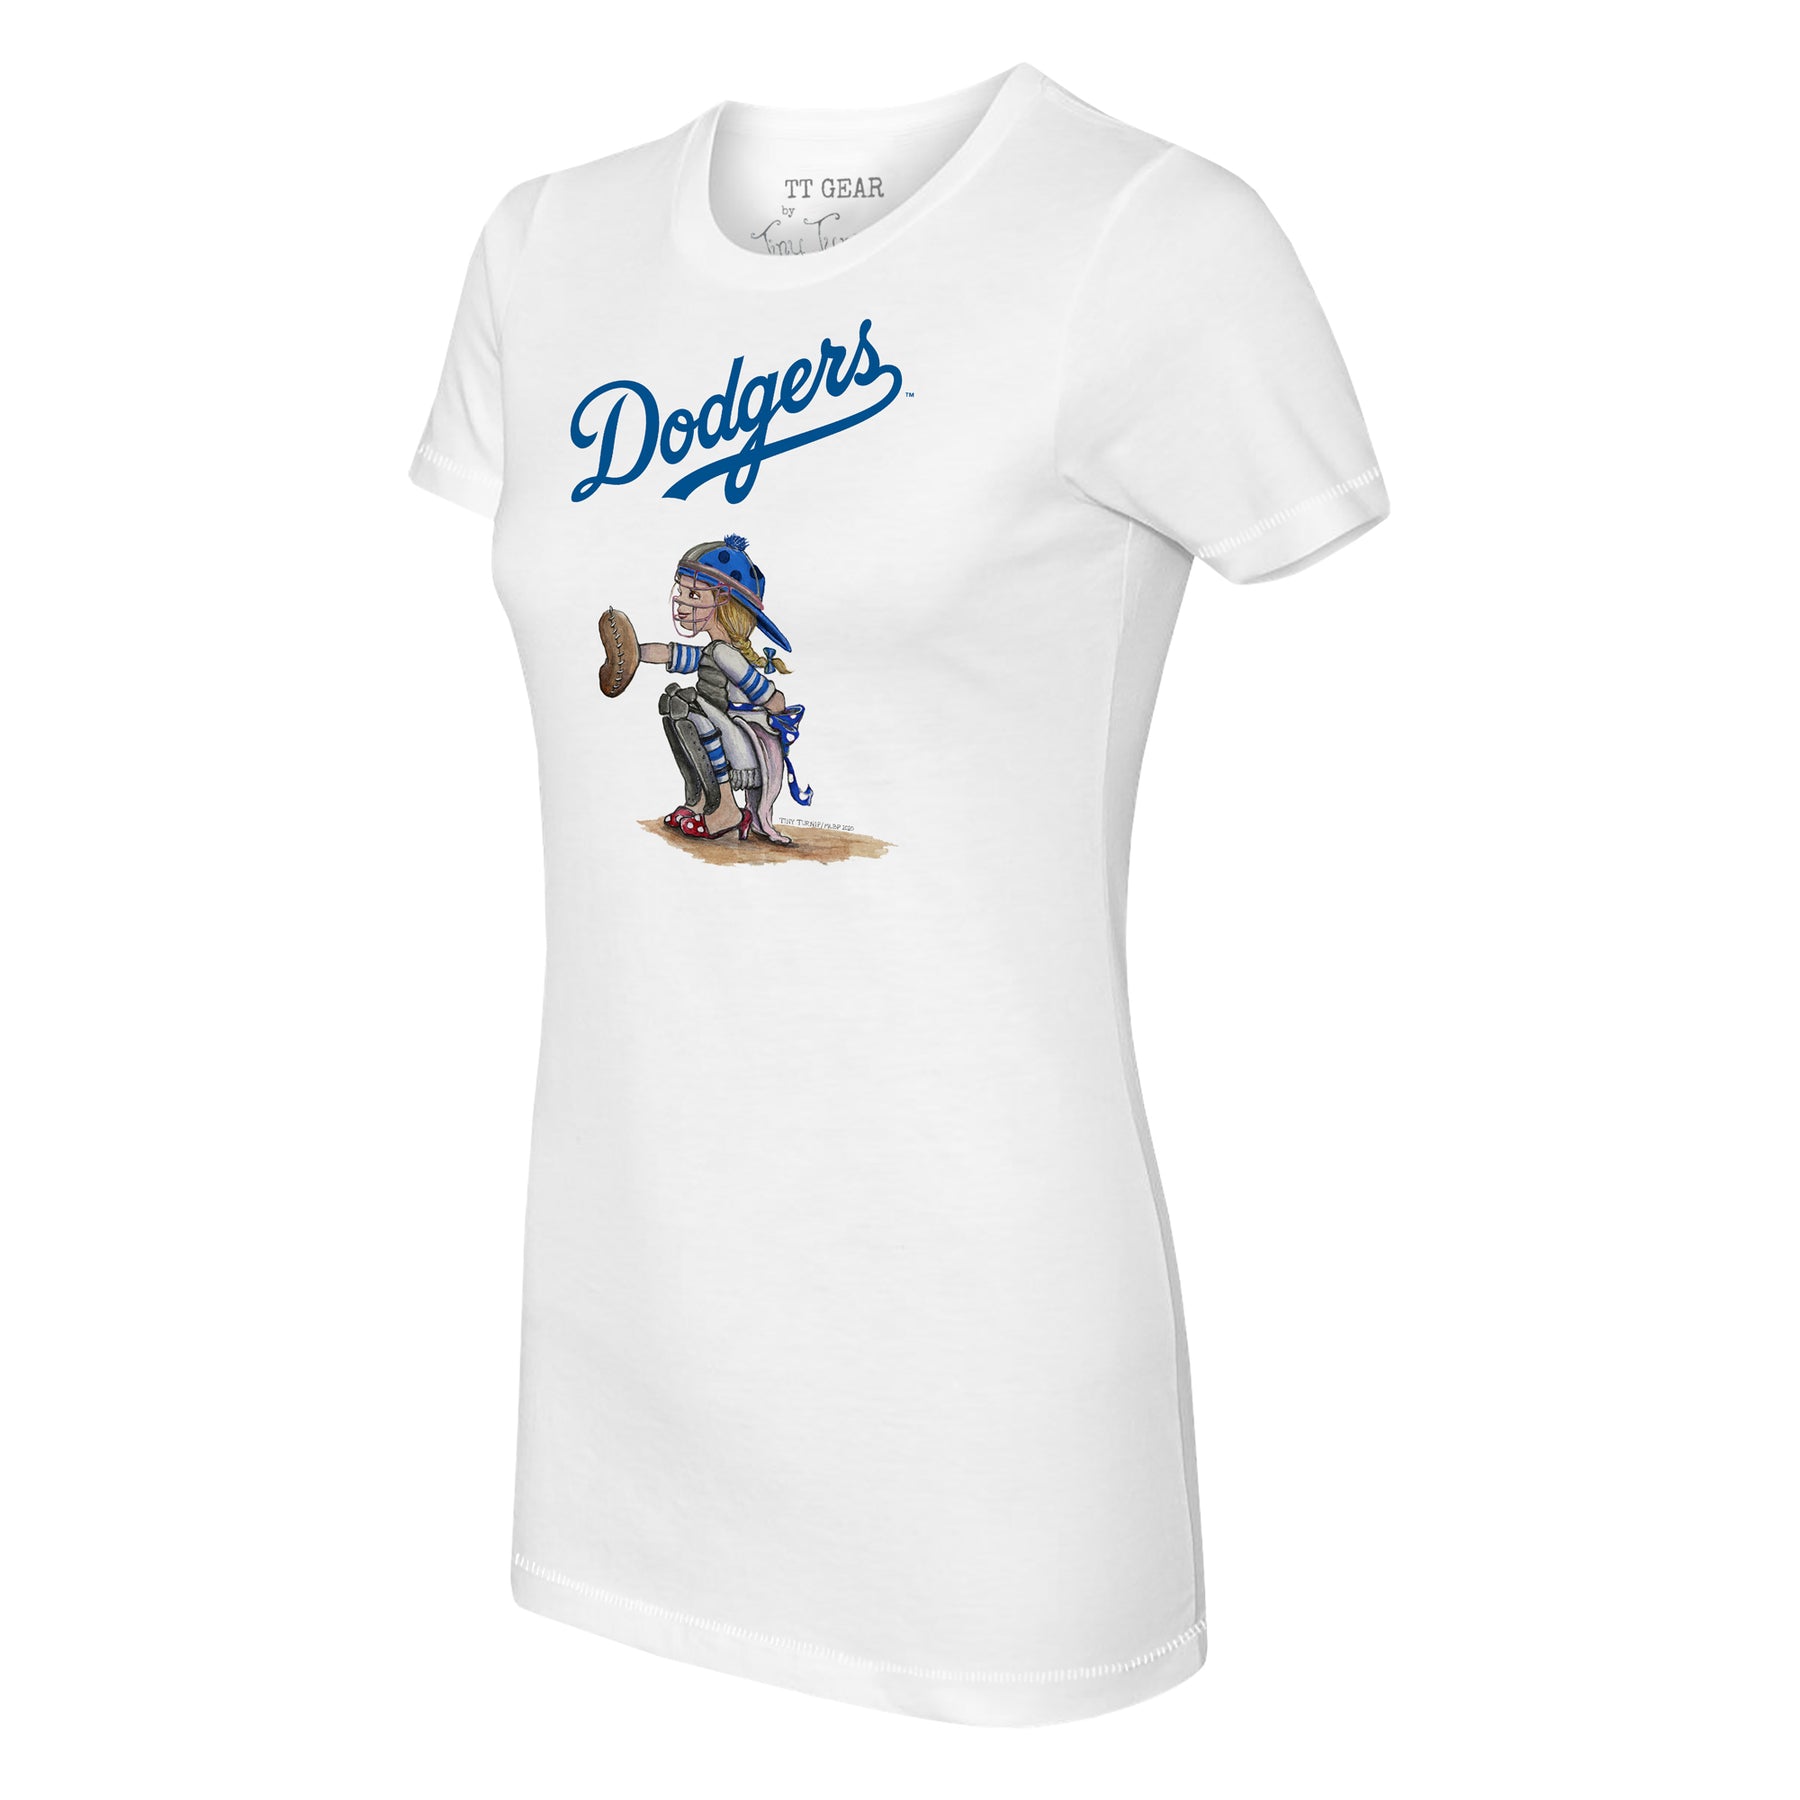 Los Angeles Dodgers Lucky Charm Tee Shirt 3T / White